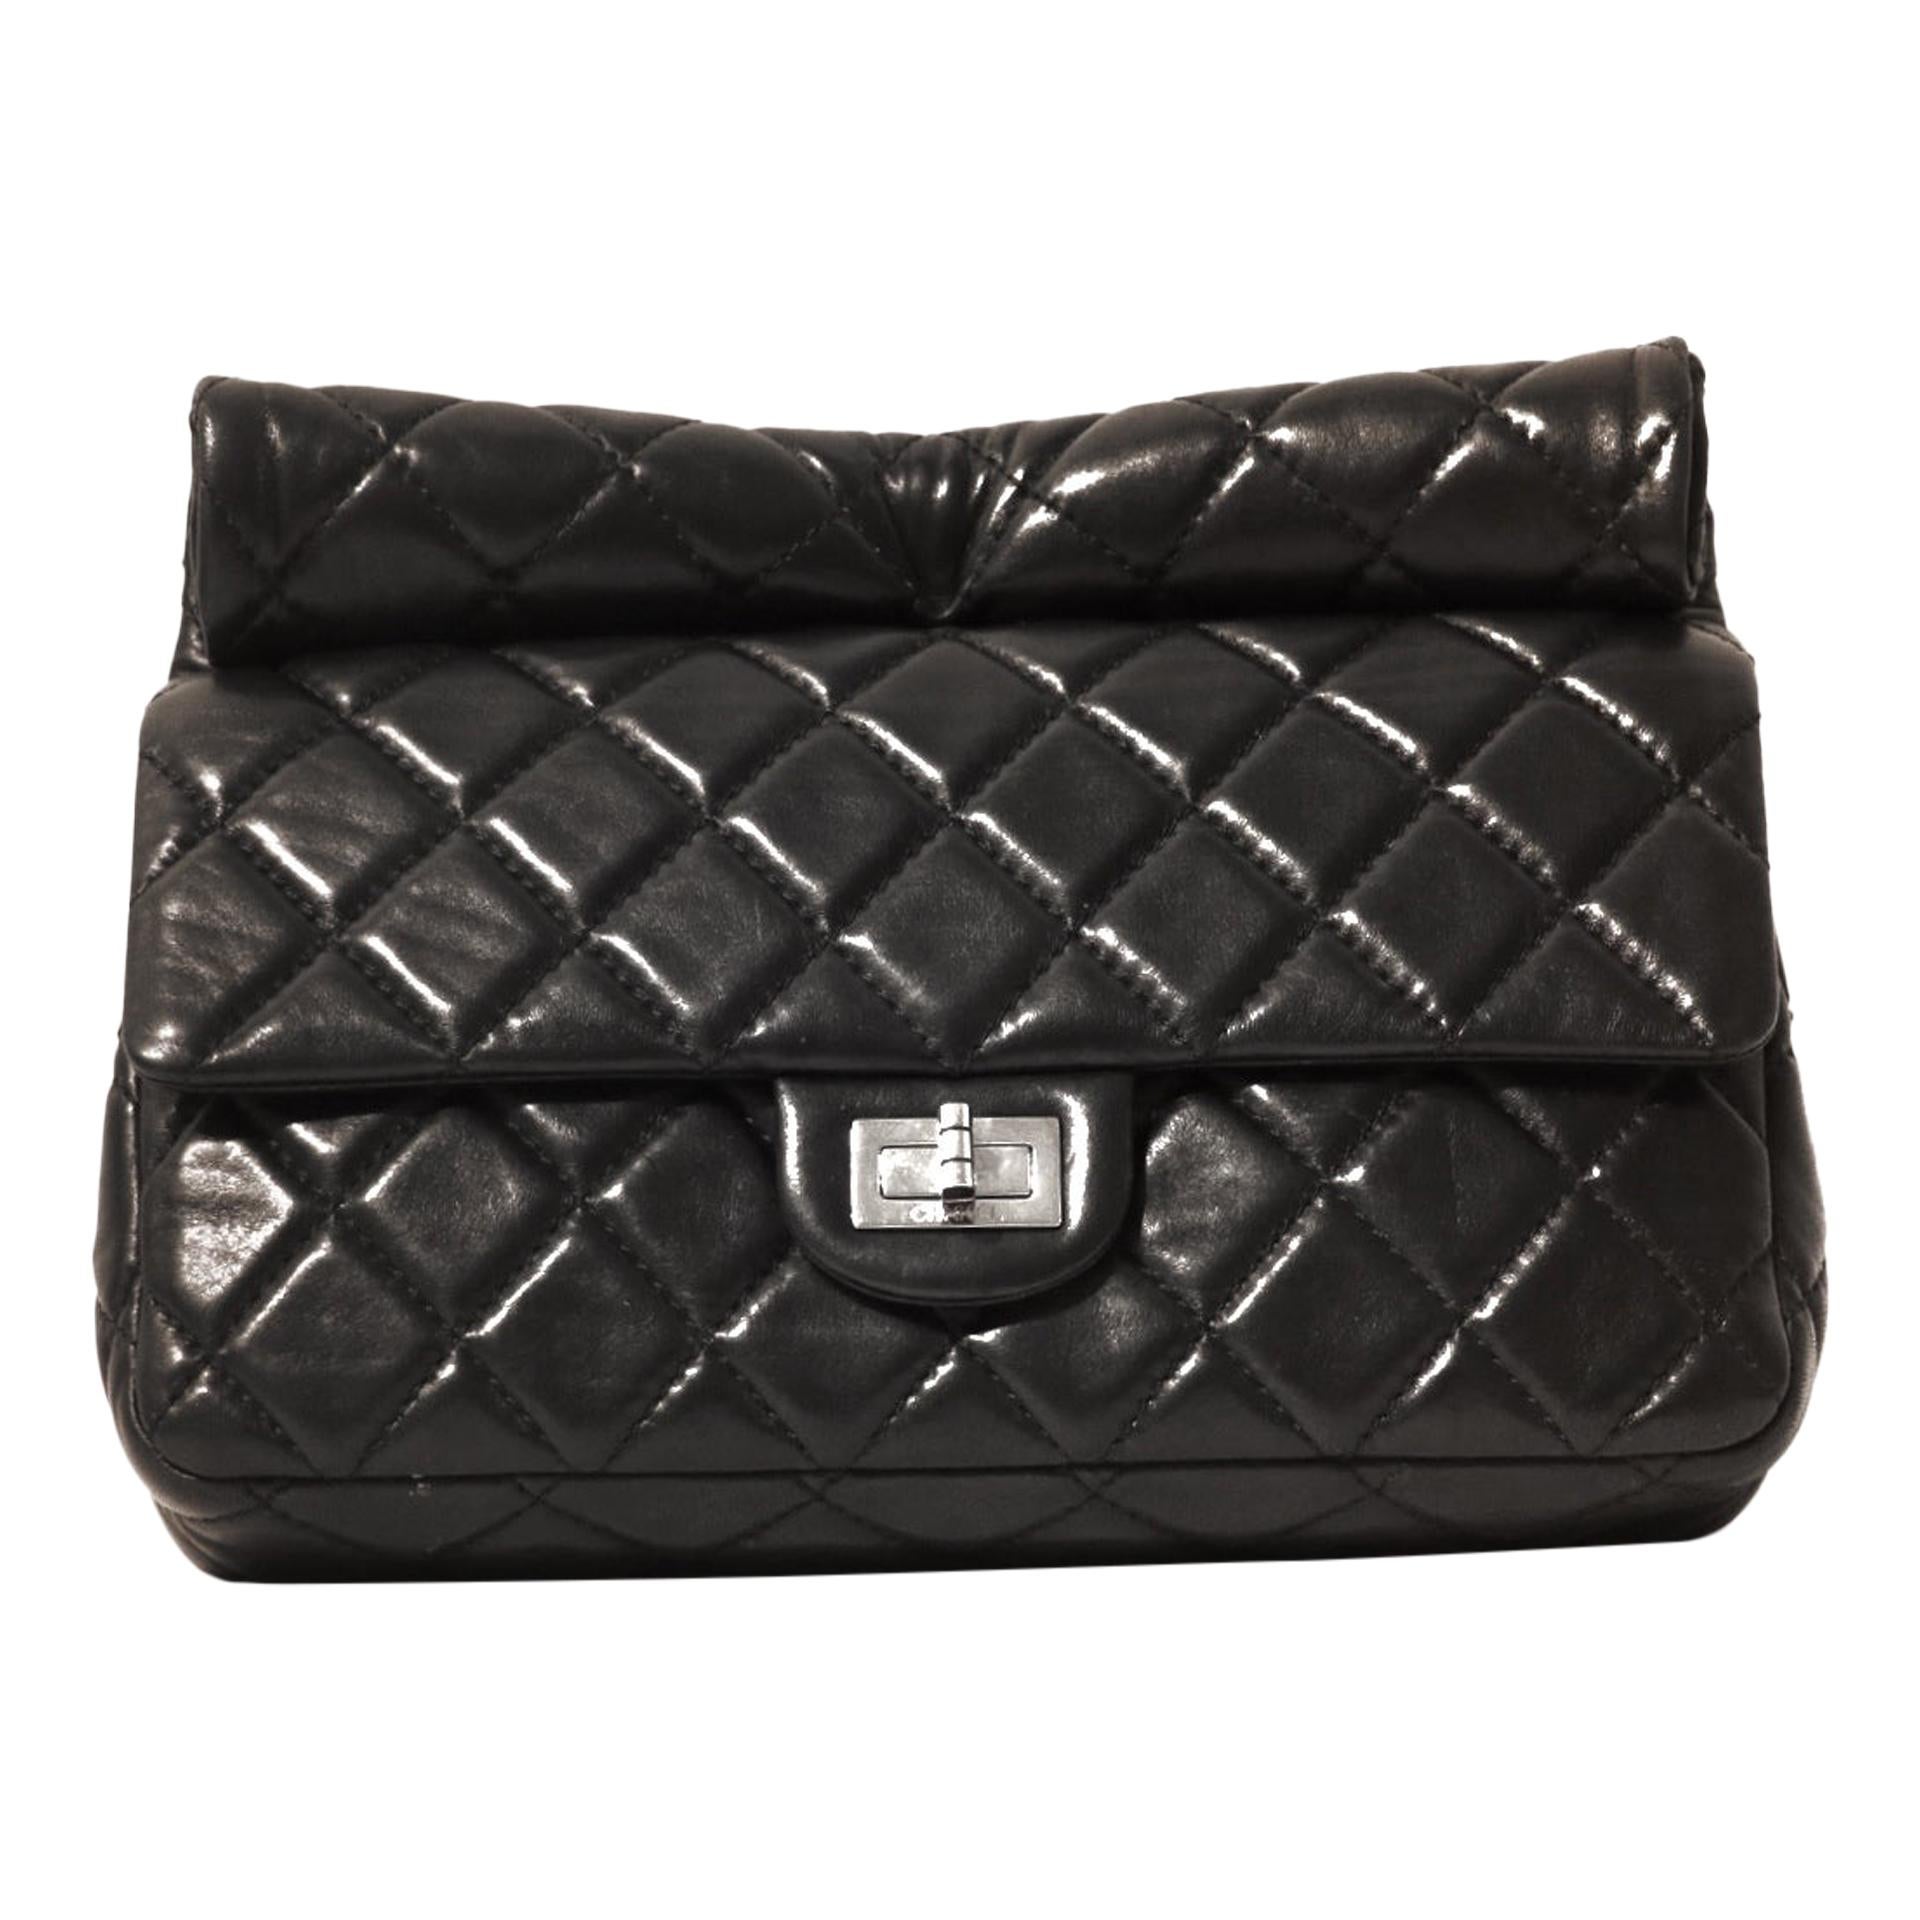 Chanel Black Leather Roll Handle Reissue Clutch